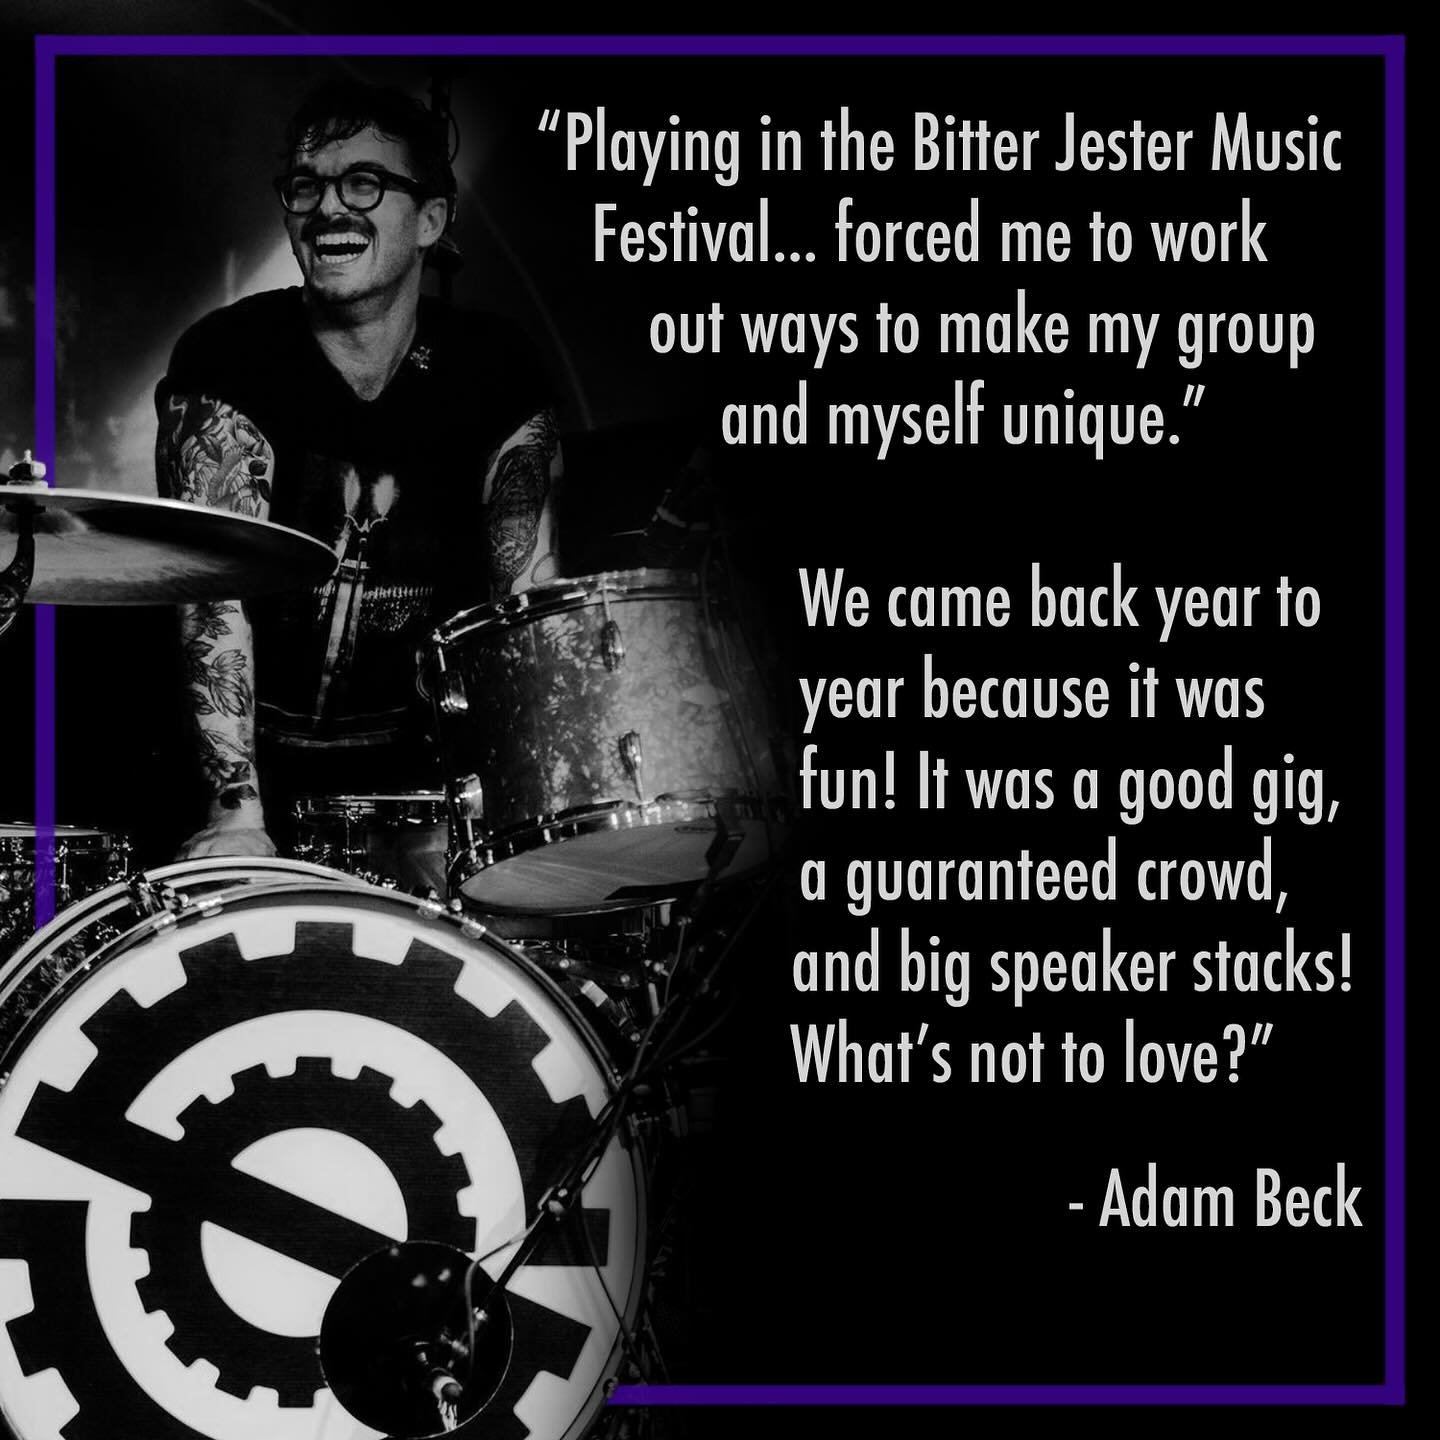 Bitter Jester Music Fest deadline in 10 days! Seeking all styles of music. Only requirement: at least half the members of a band must be 21 or younger to apply (link in bio)!

Adam Beck was our very first BJMF Grand Champion in 2006 with his band &ld